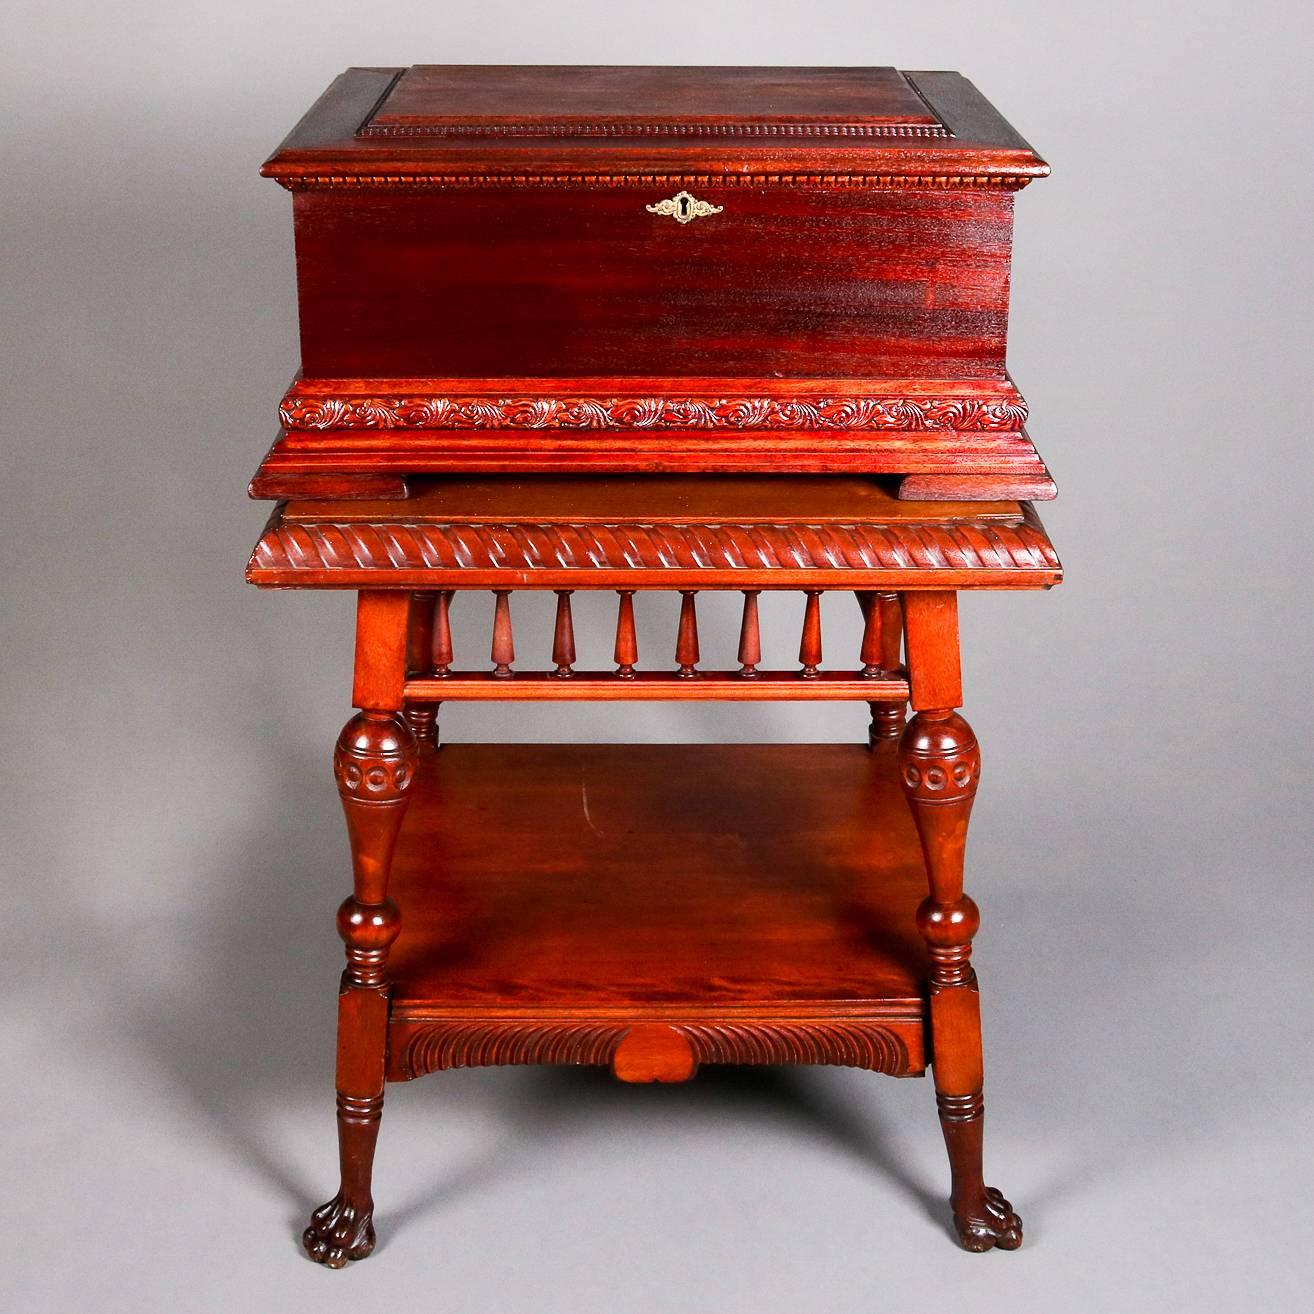 Antique Stella double comb music box features mahogany case and sits on carved claw foot stand, music box in working condition, includes Yankee Doodle disc, 19th century

Measures: 42